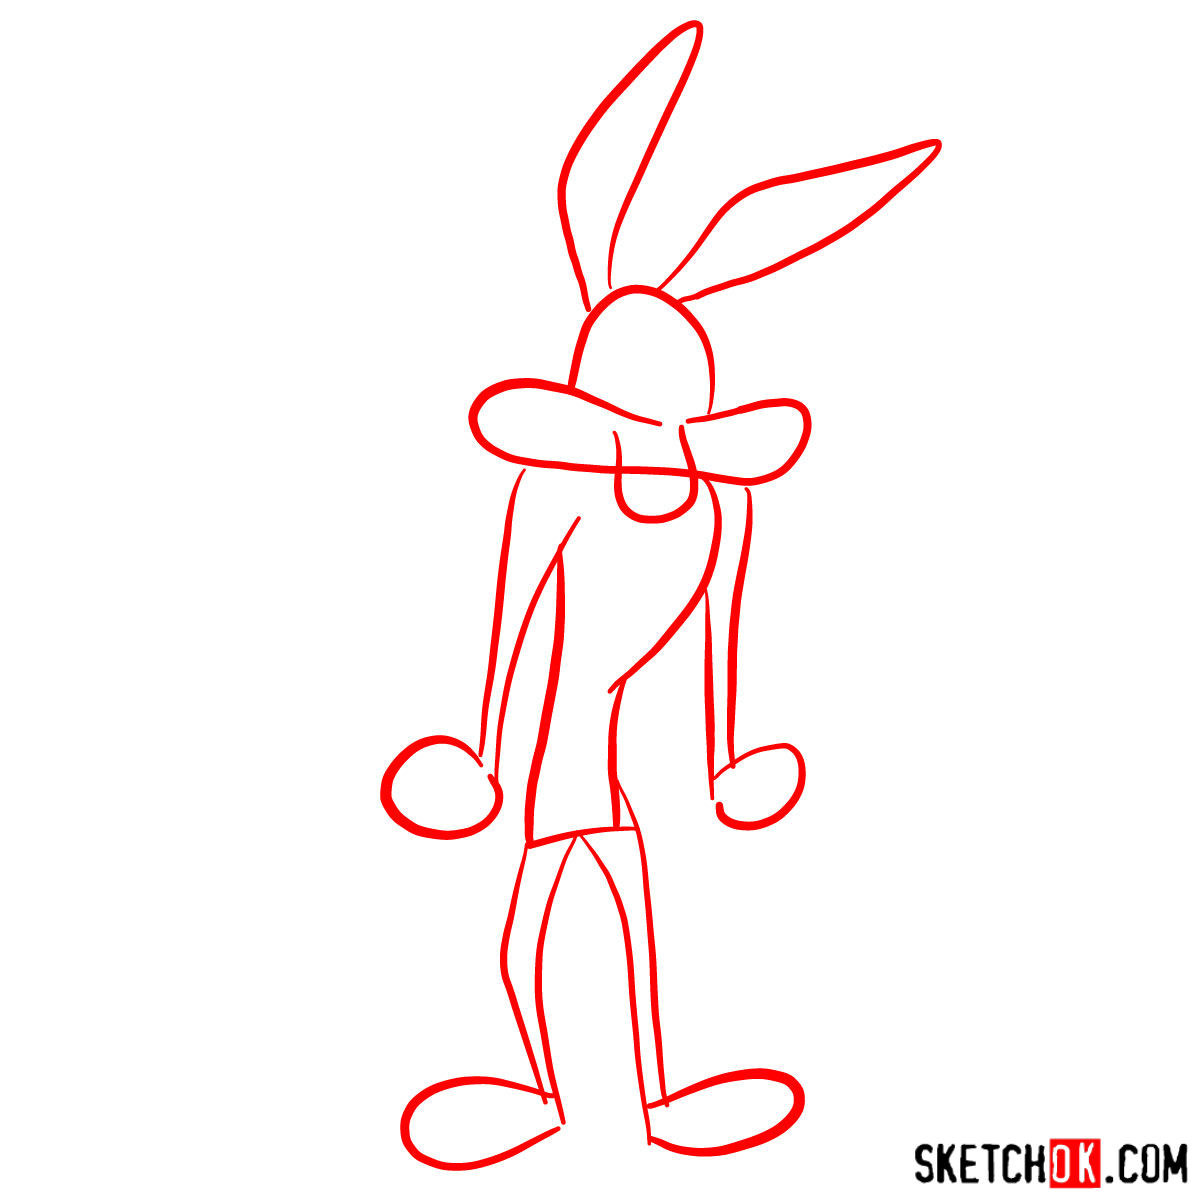 How to draw Wile E. Coyote - step 01